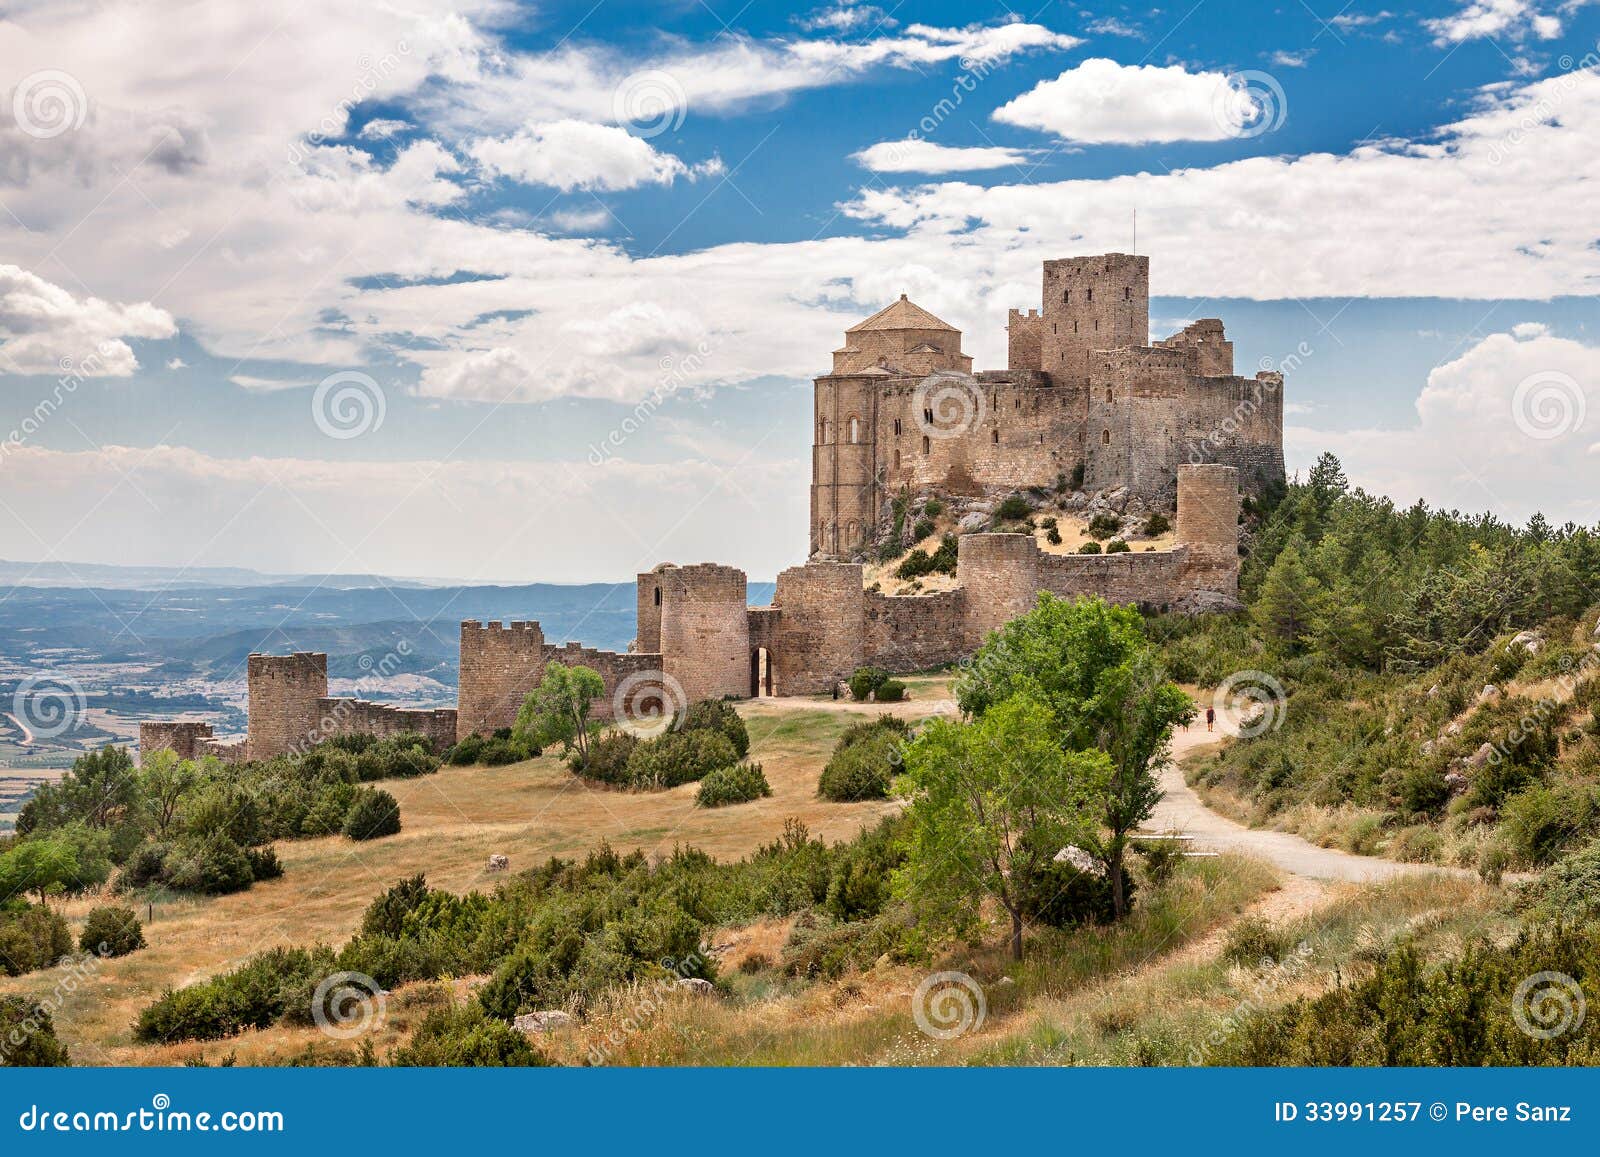 Loarre Castle in Spain stock image. Image of stone, ruins - 33991257